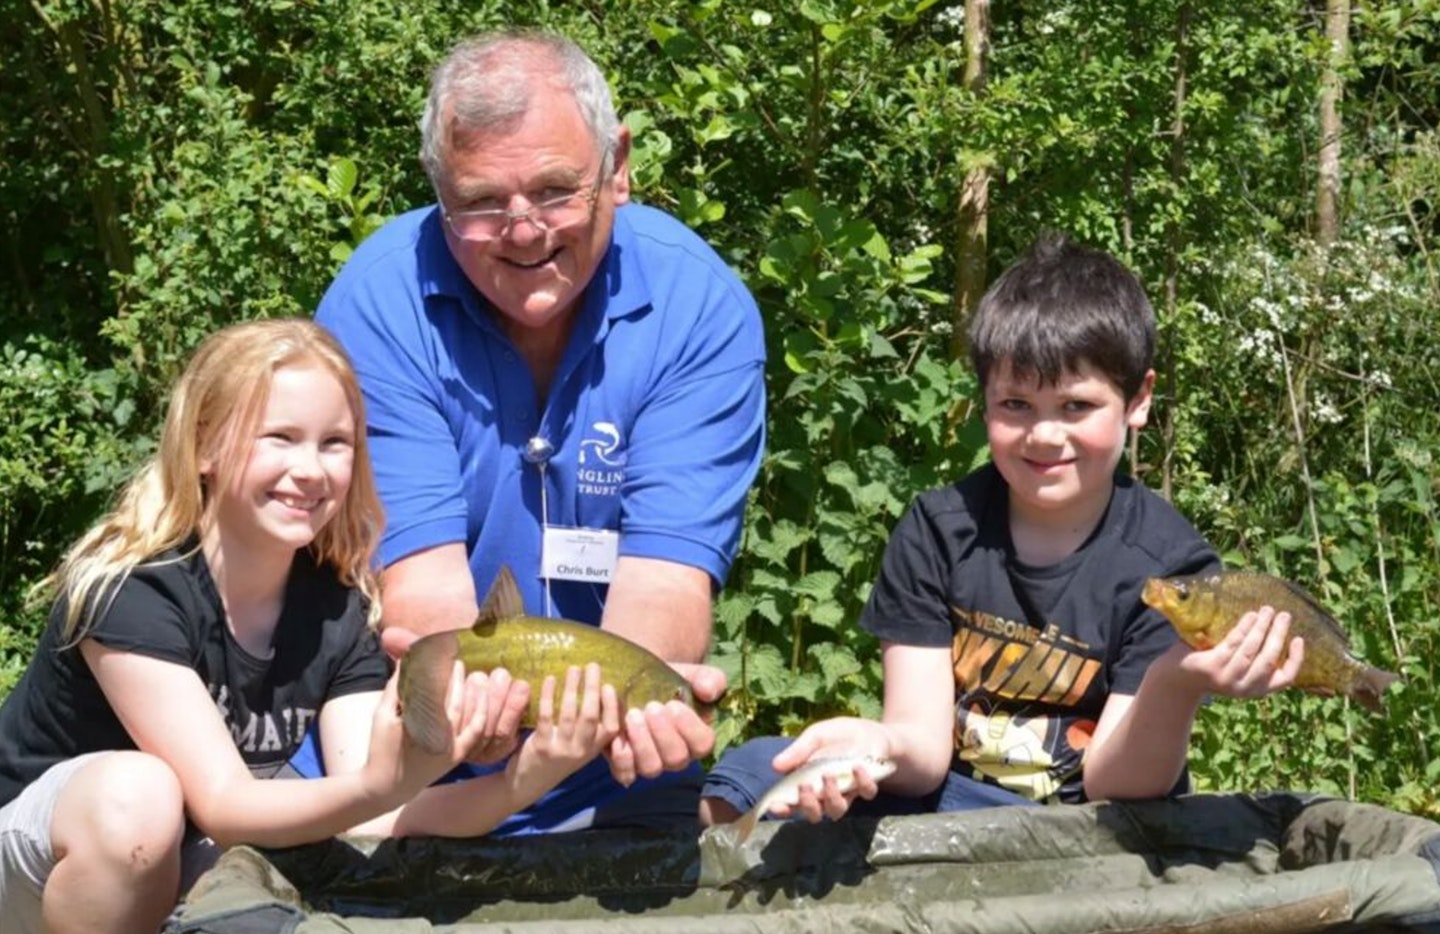 The Angling Coaching Initiative was formed in 2017 by Chris Burt